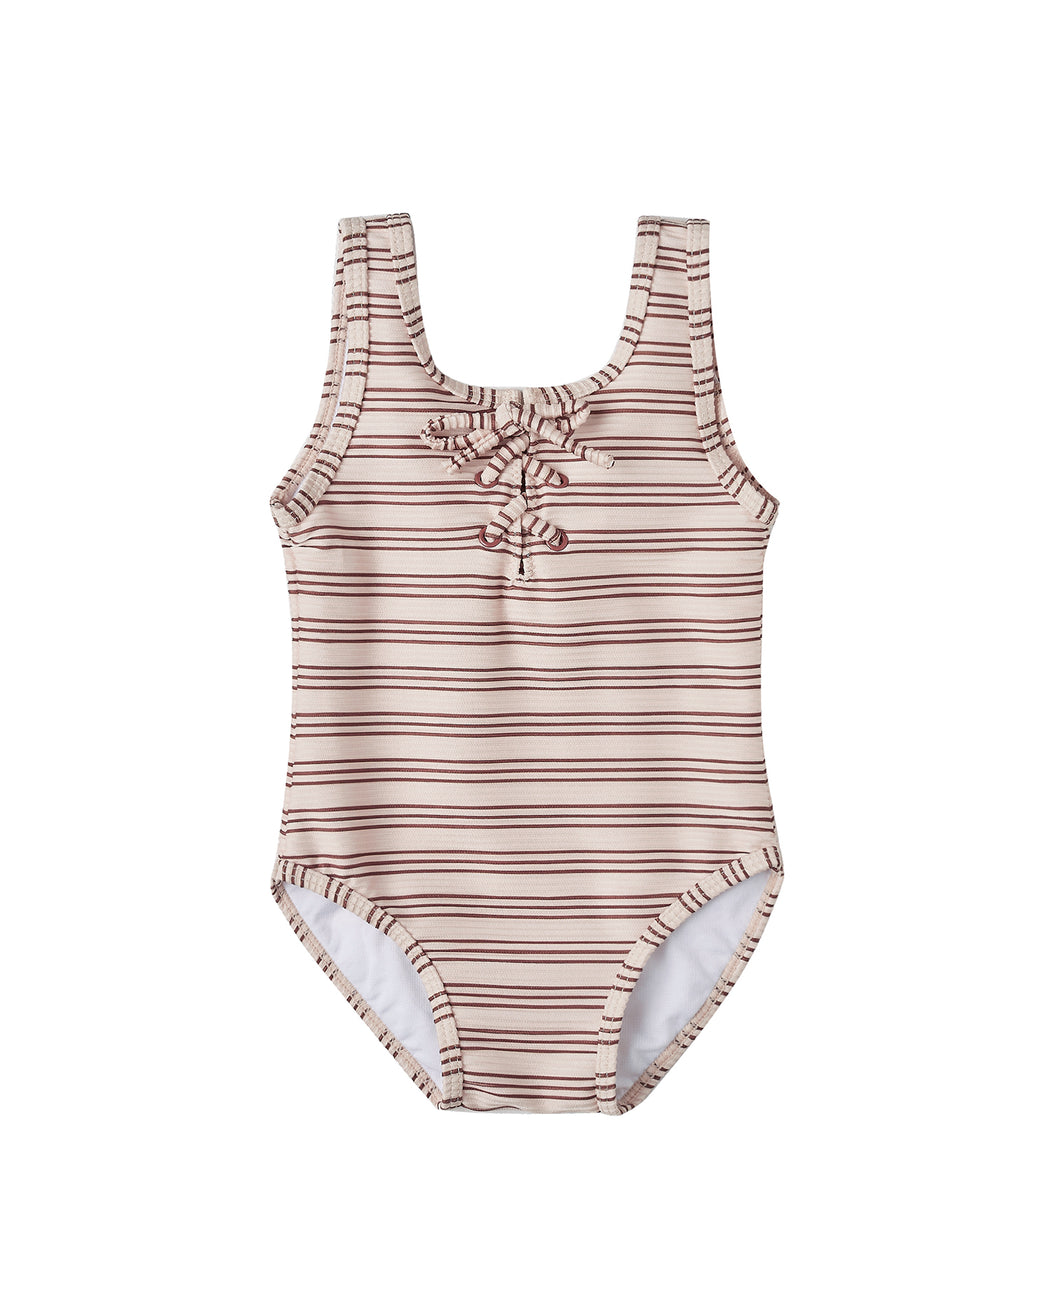 Lace One Piece Swimsuit – Amber Stripe